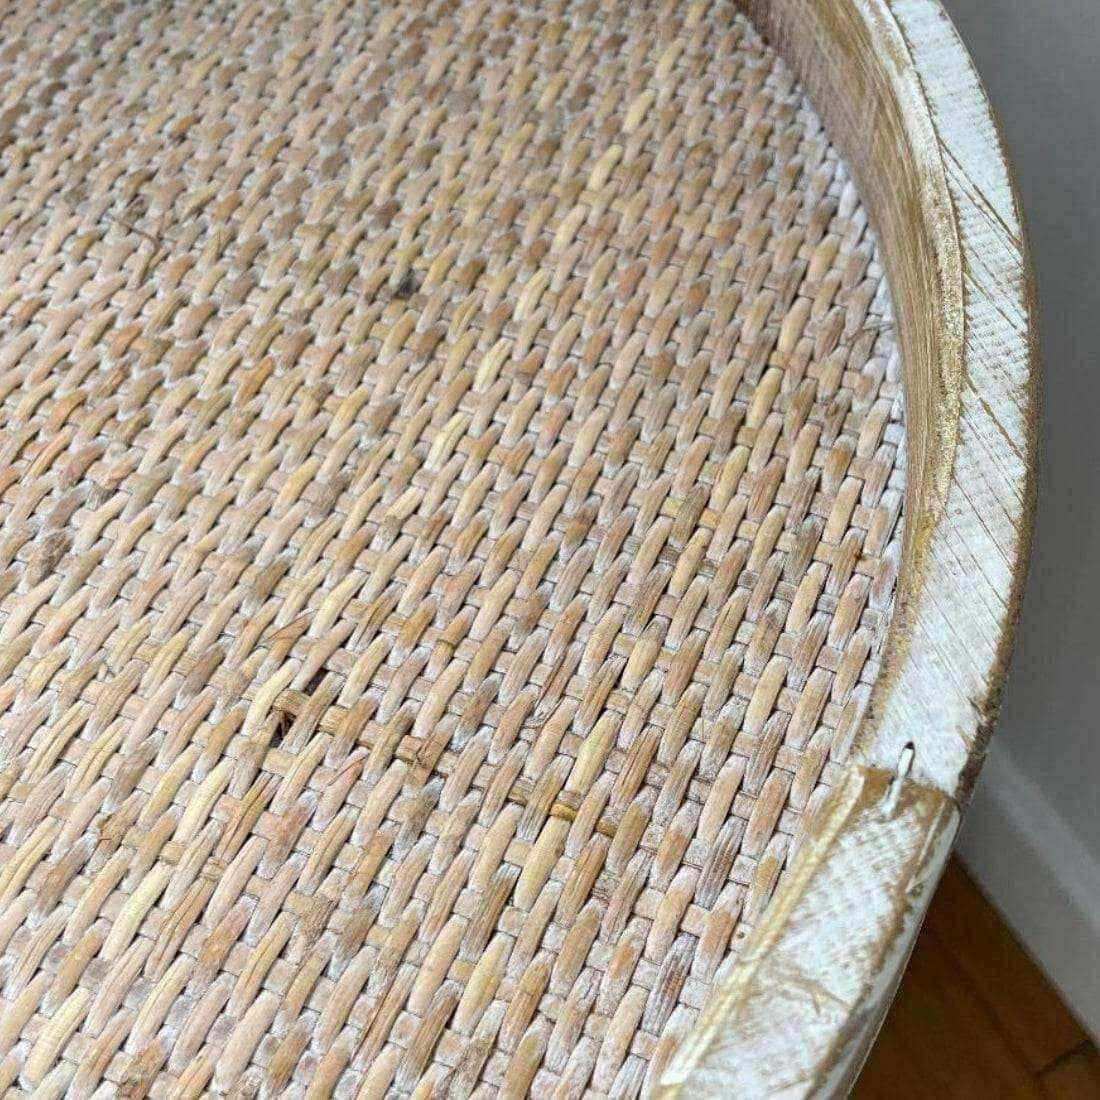 Round Rustic Woven Topped Lipped Side Table - The Farthing